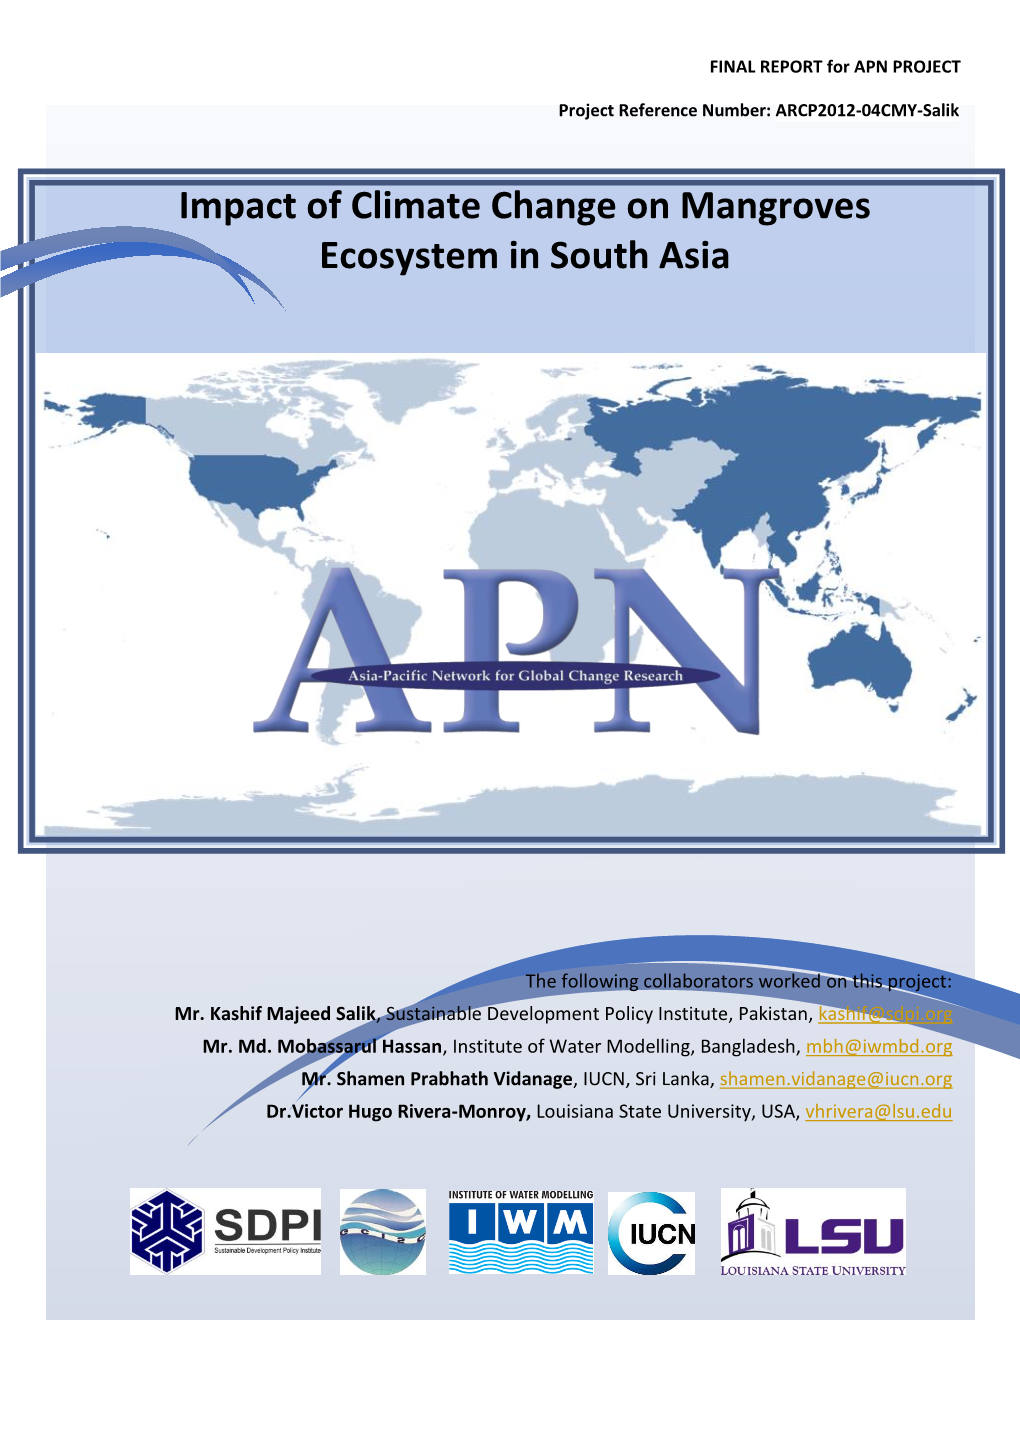 Impact of Climate Change on Mangroves Ecosystem in South Asia